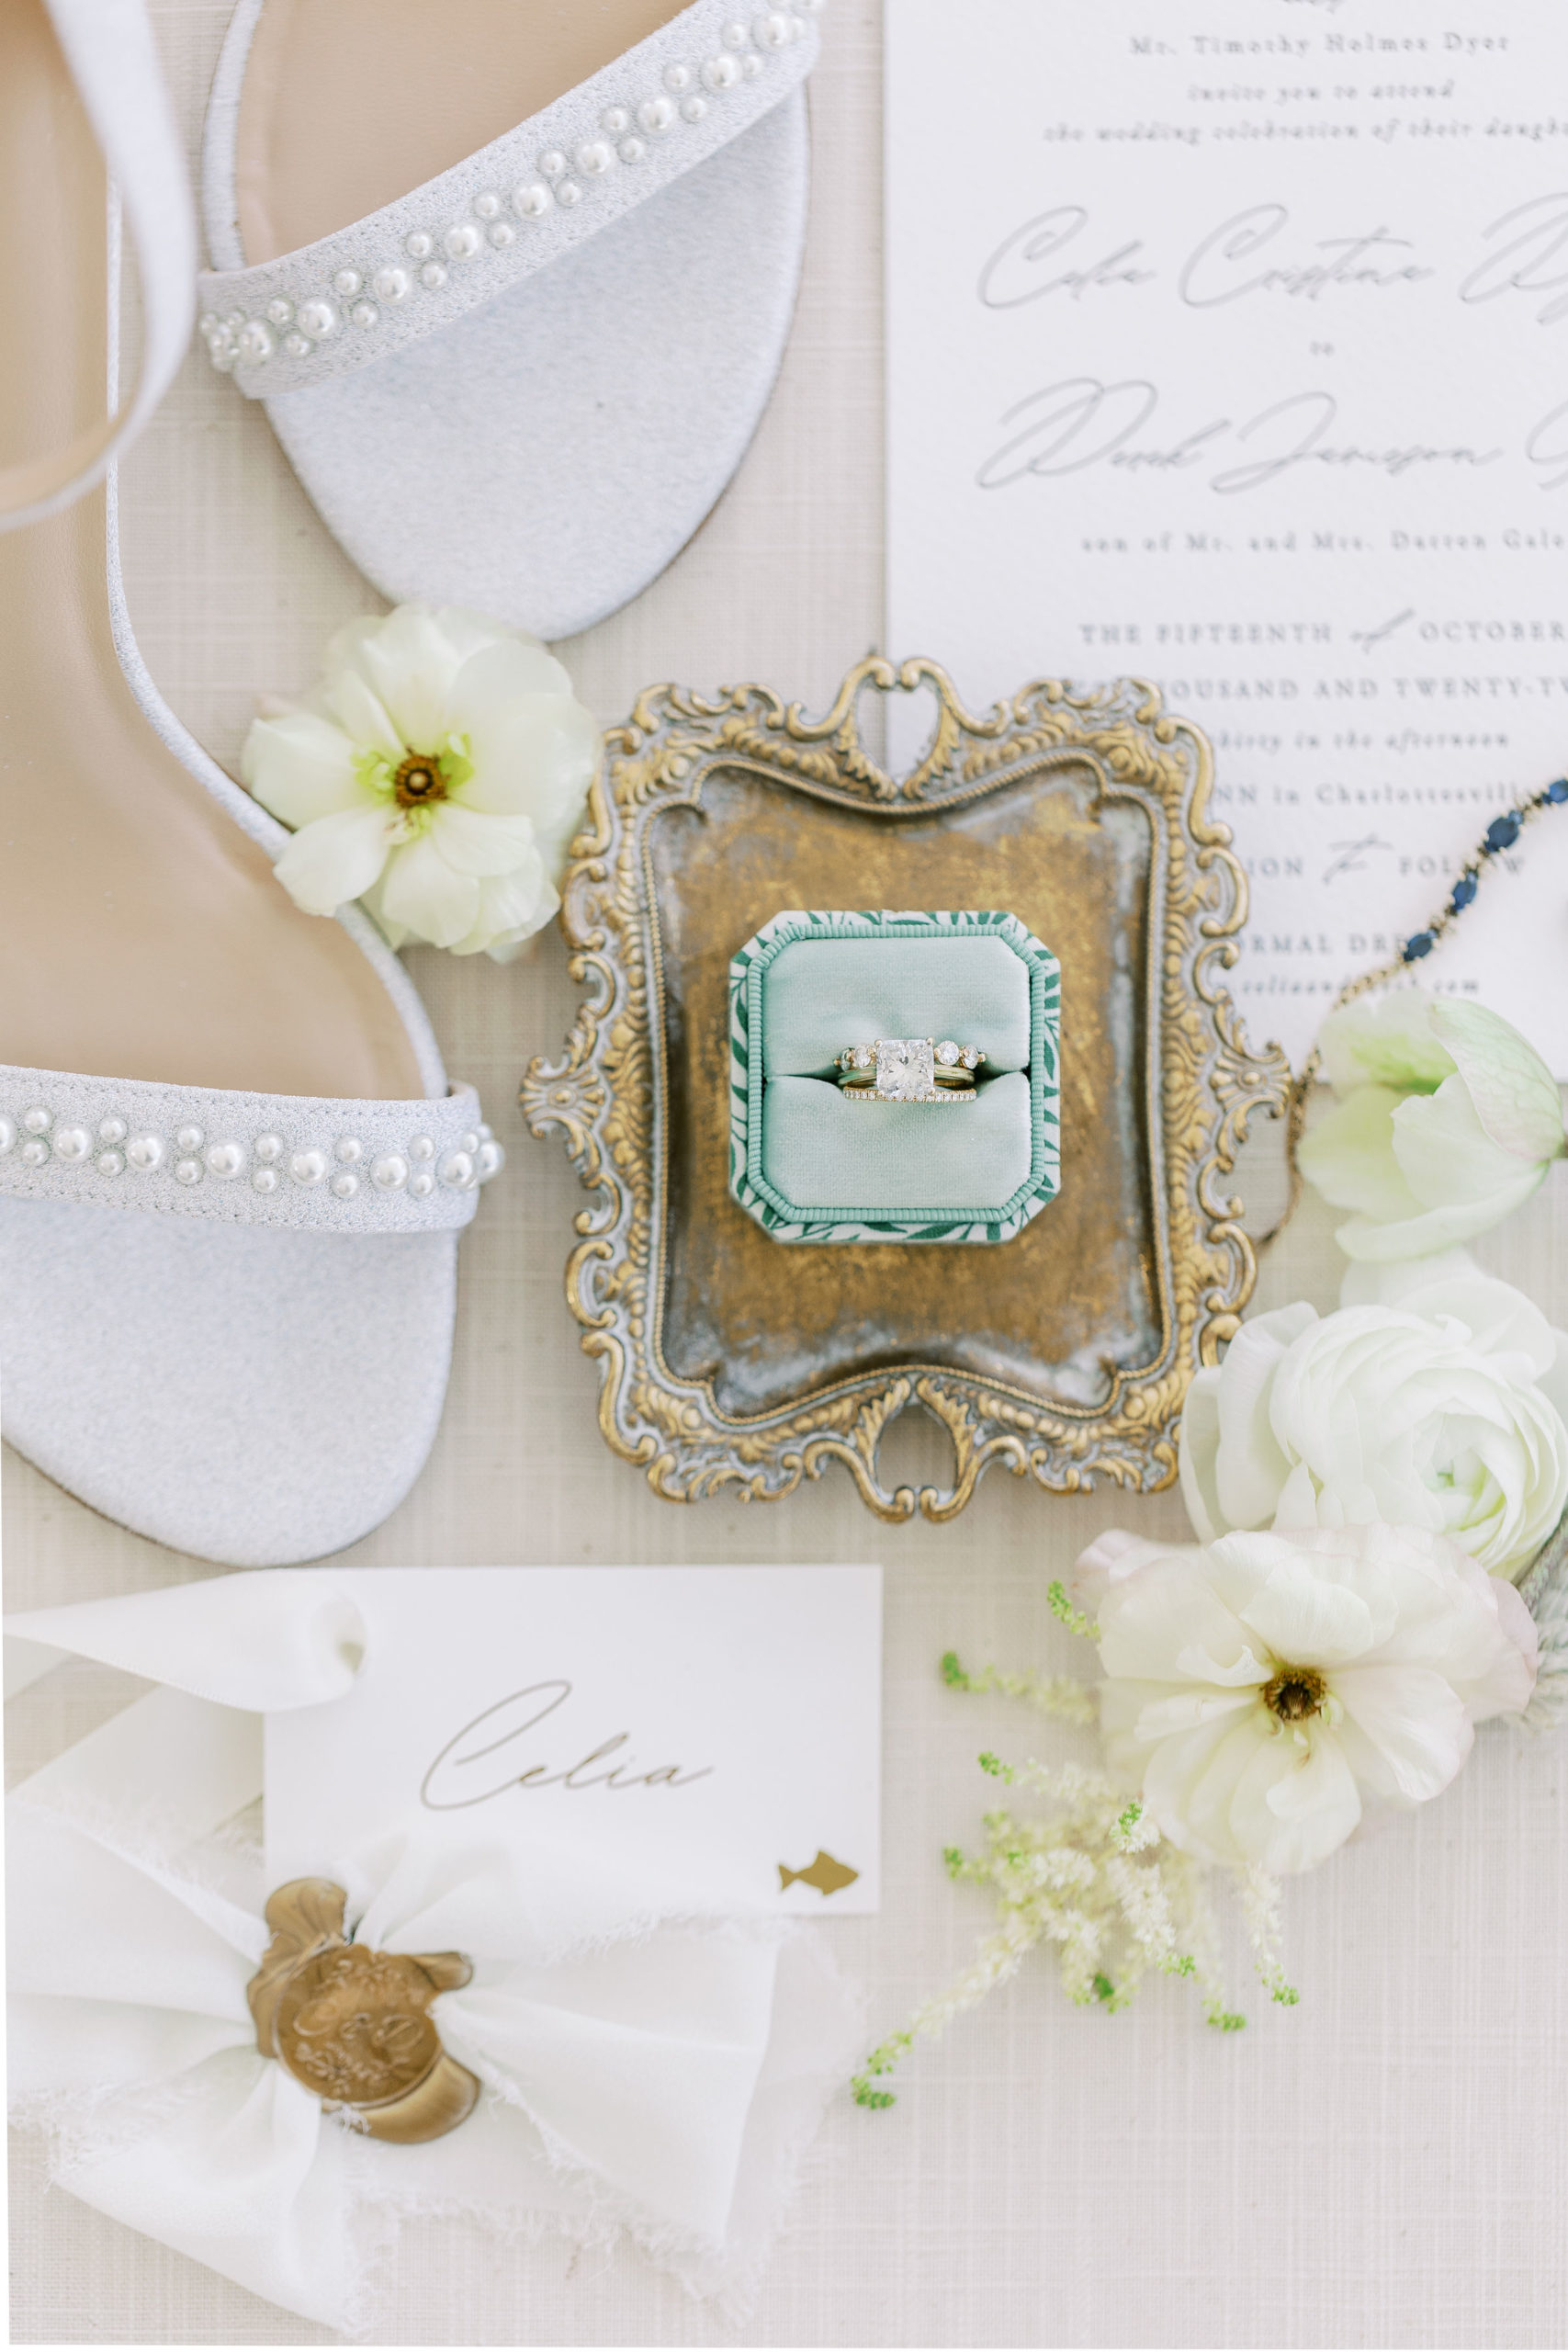 Flat lay of cream wedding invitations, white high heels with small pearls, cream flowers, and wedding ring in green box on gold tray for Clifton wedding photography